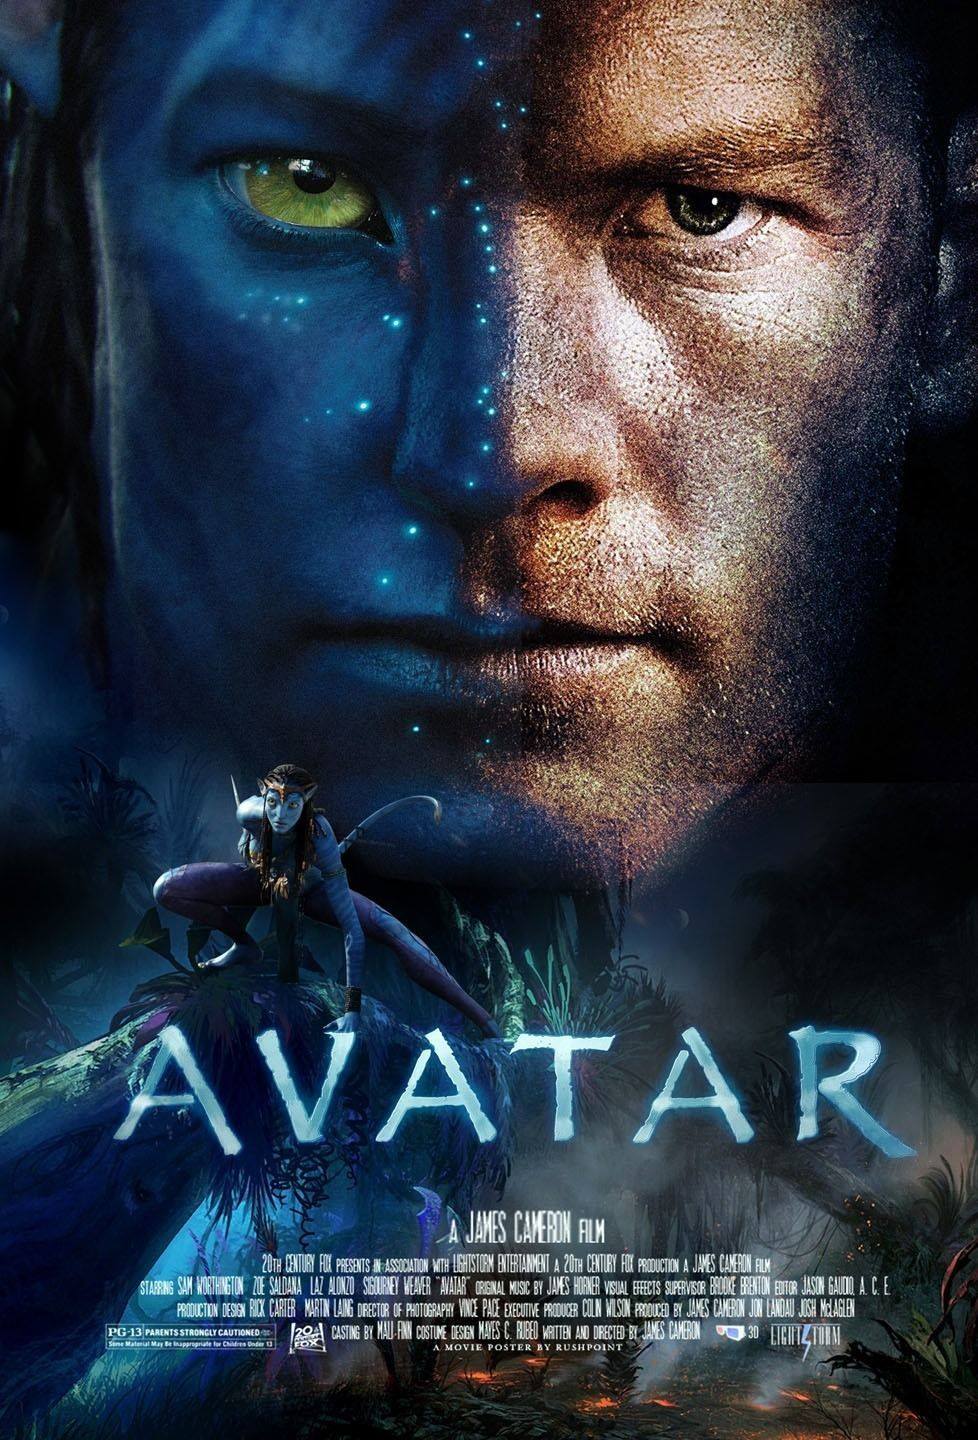 Movie Review Avatar 2009  The Lesser Joke book reviews and more